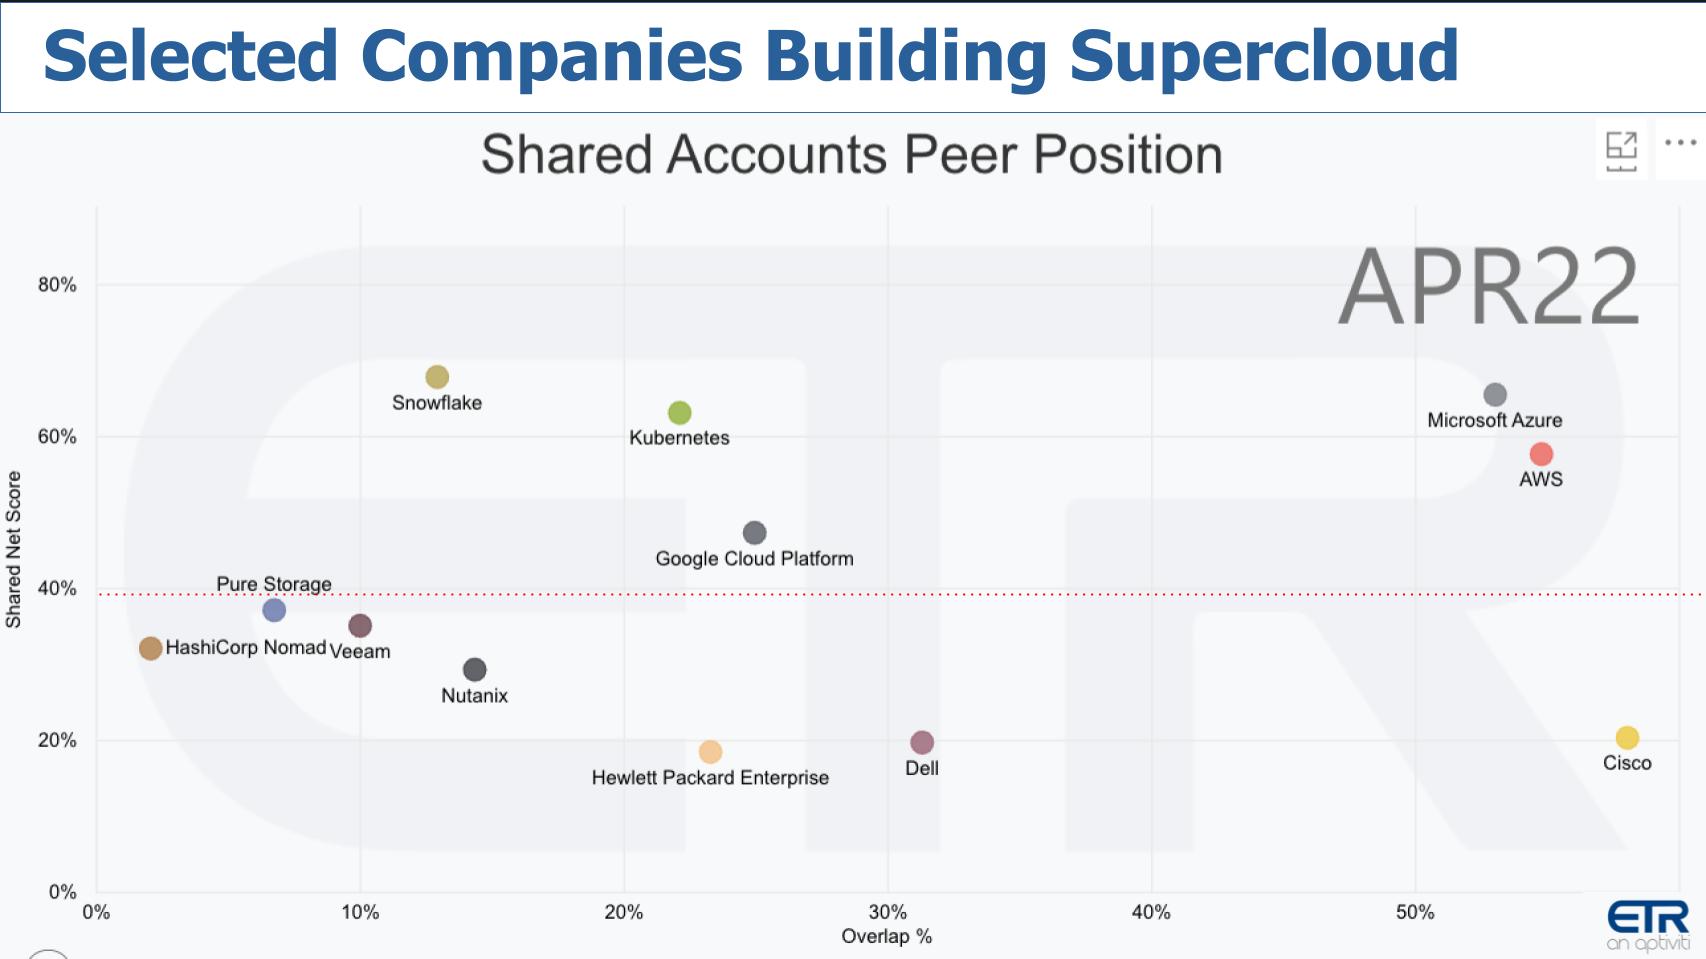 ETR data on selected companies building supercloud